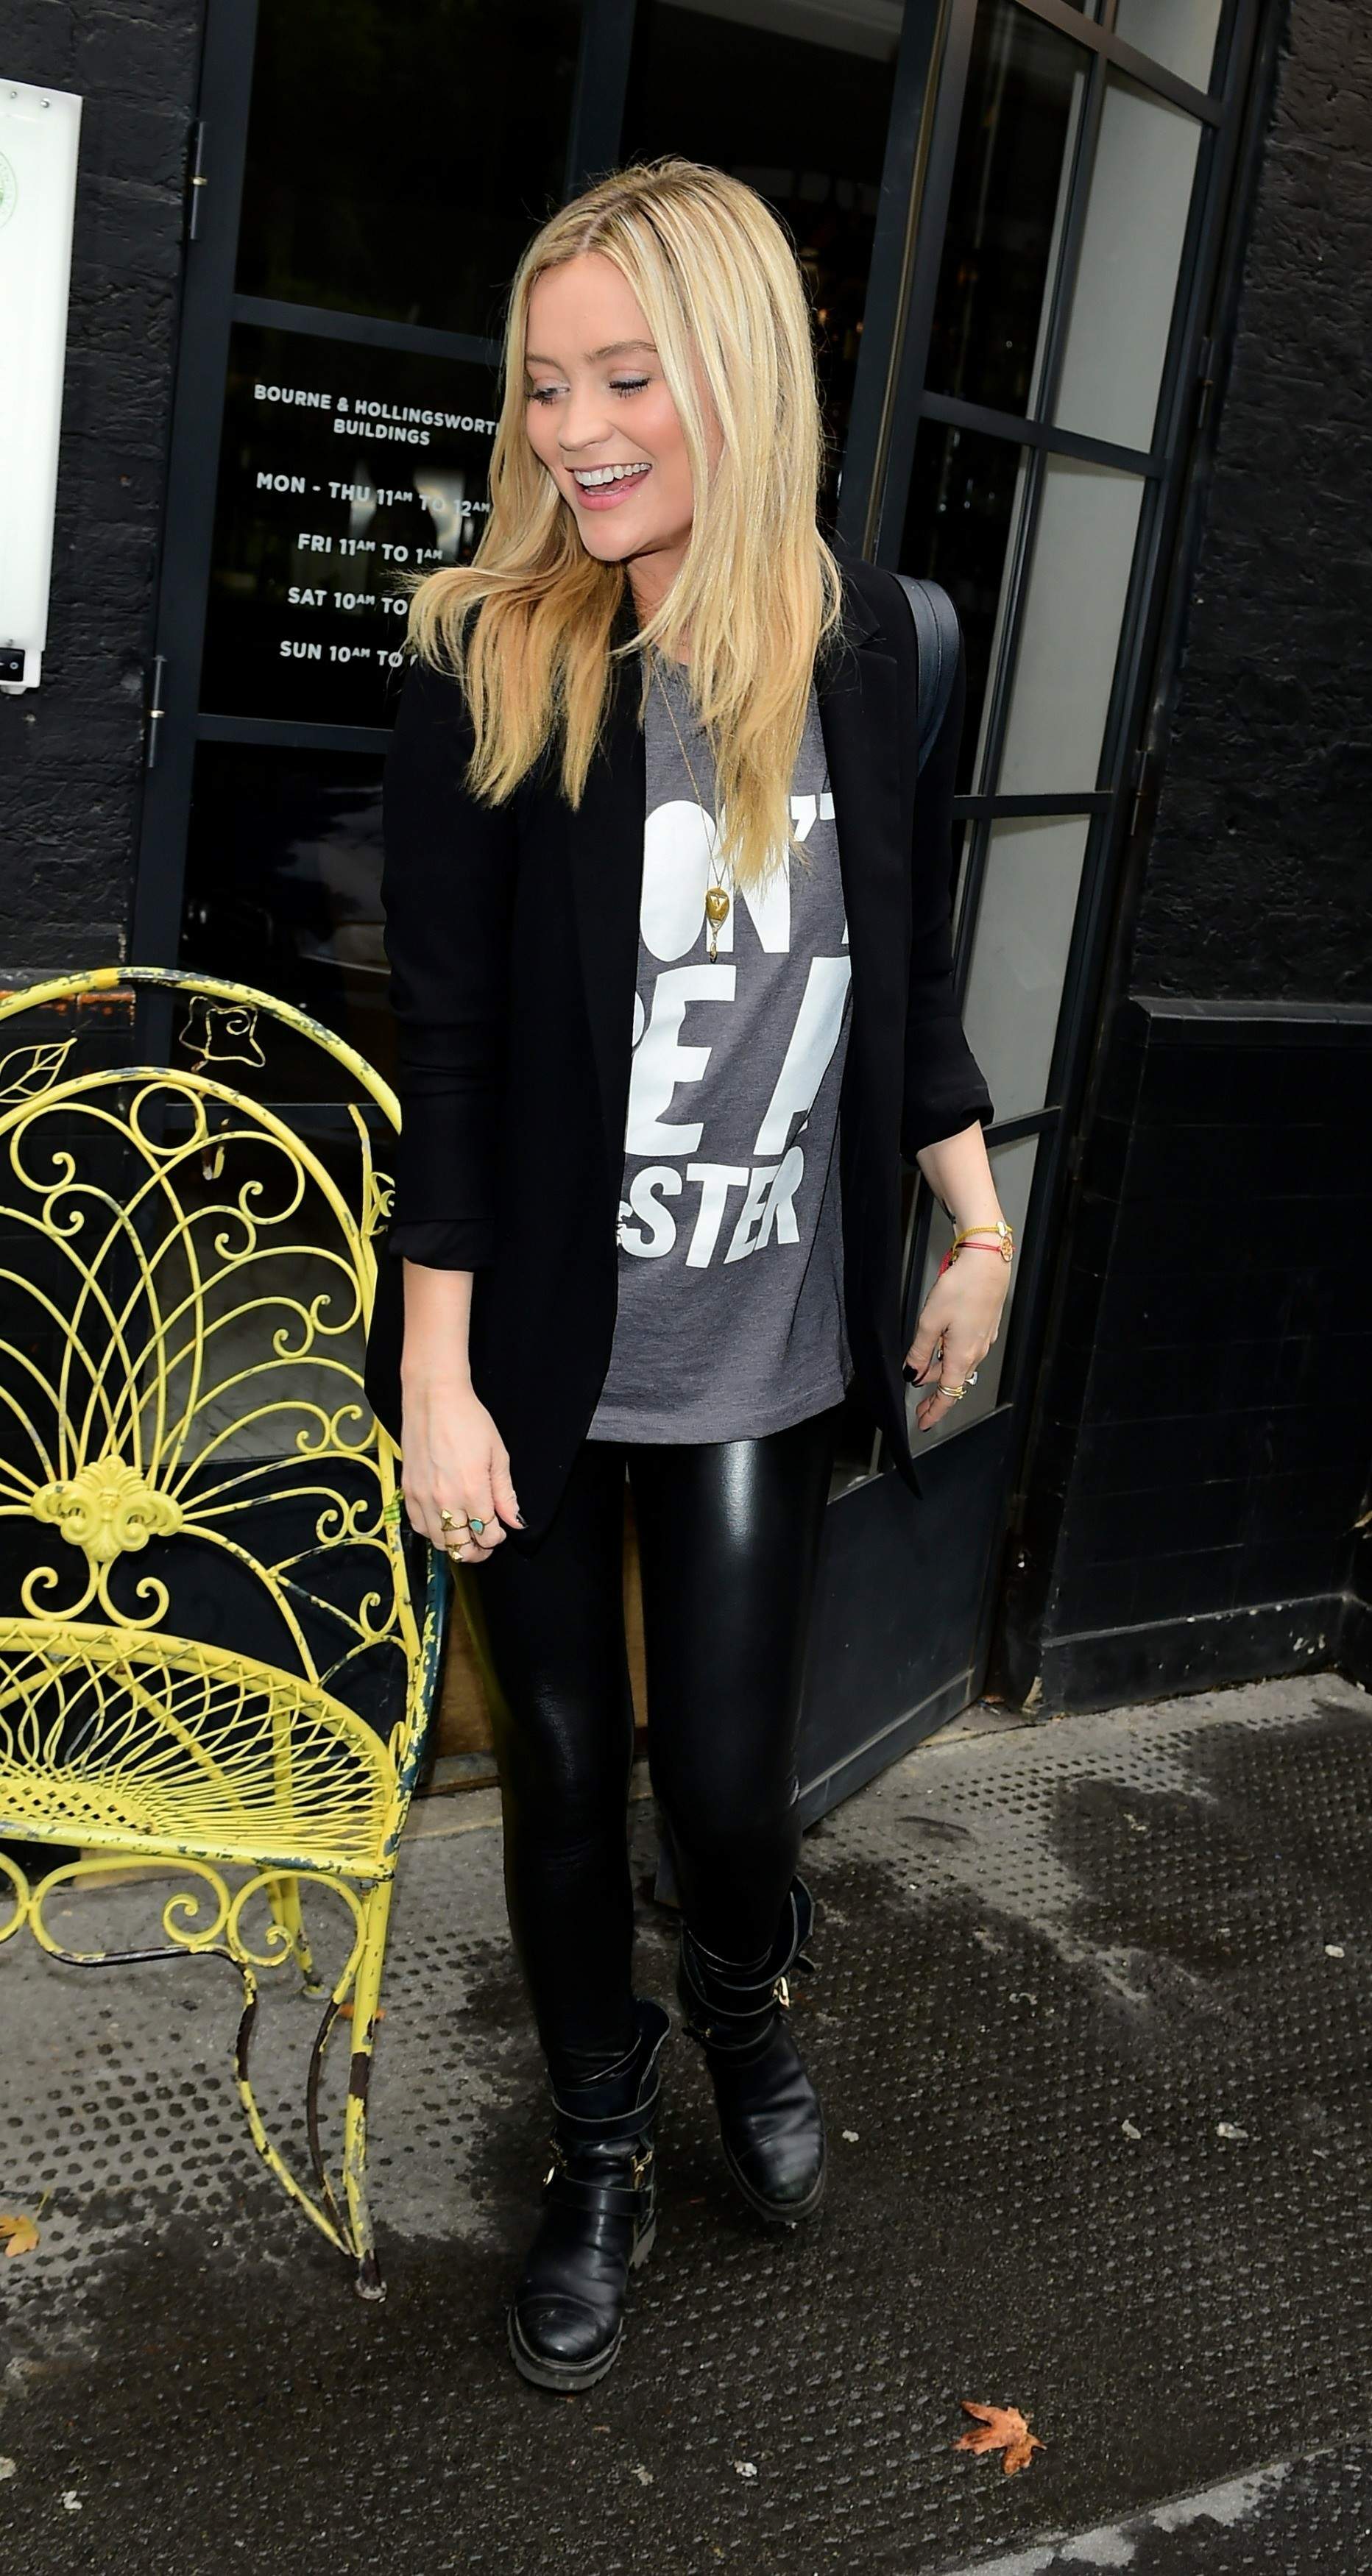 Laura Whitmore arrives at Bourne and Hollingsworth Buildings